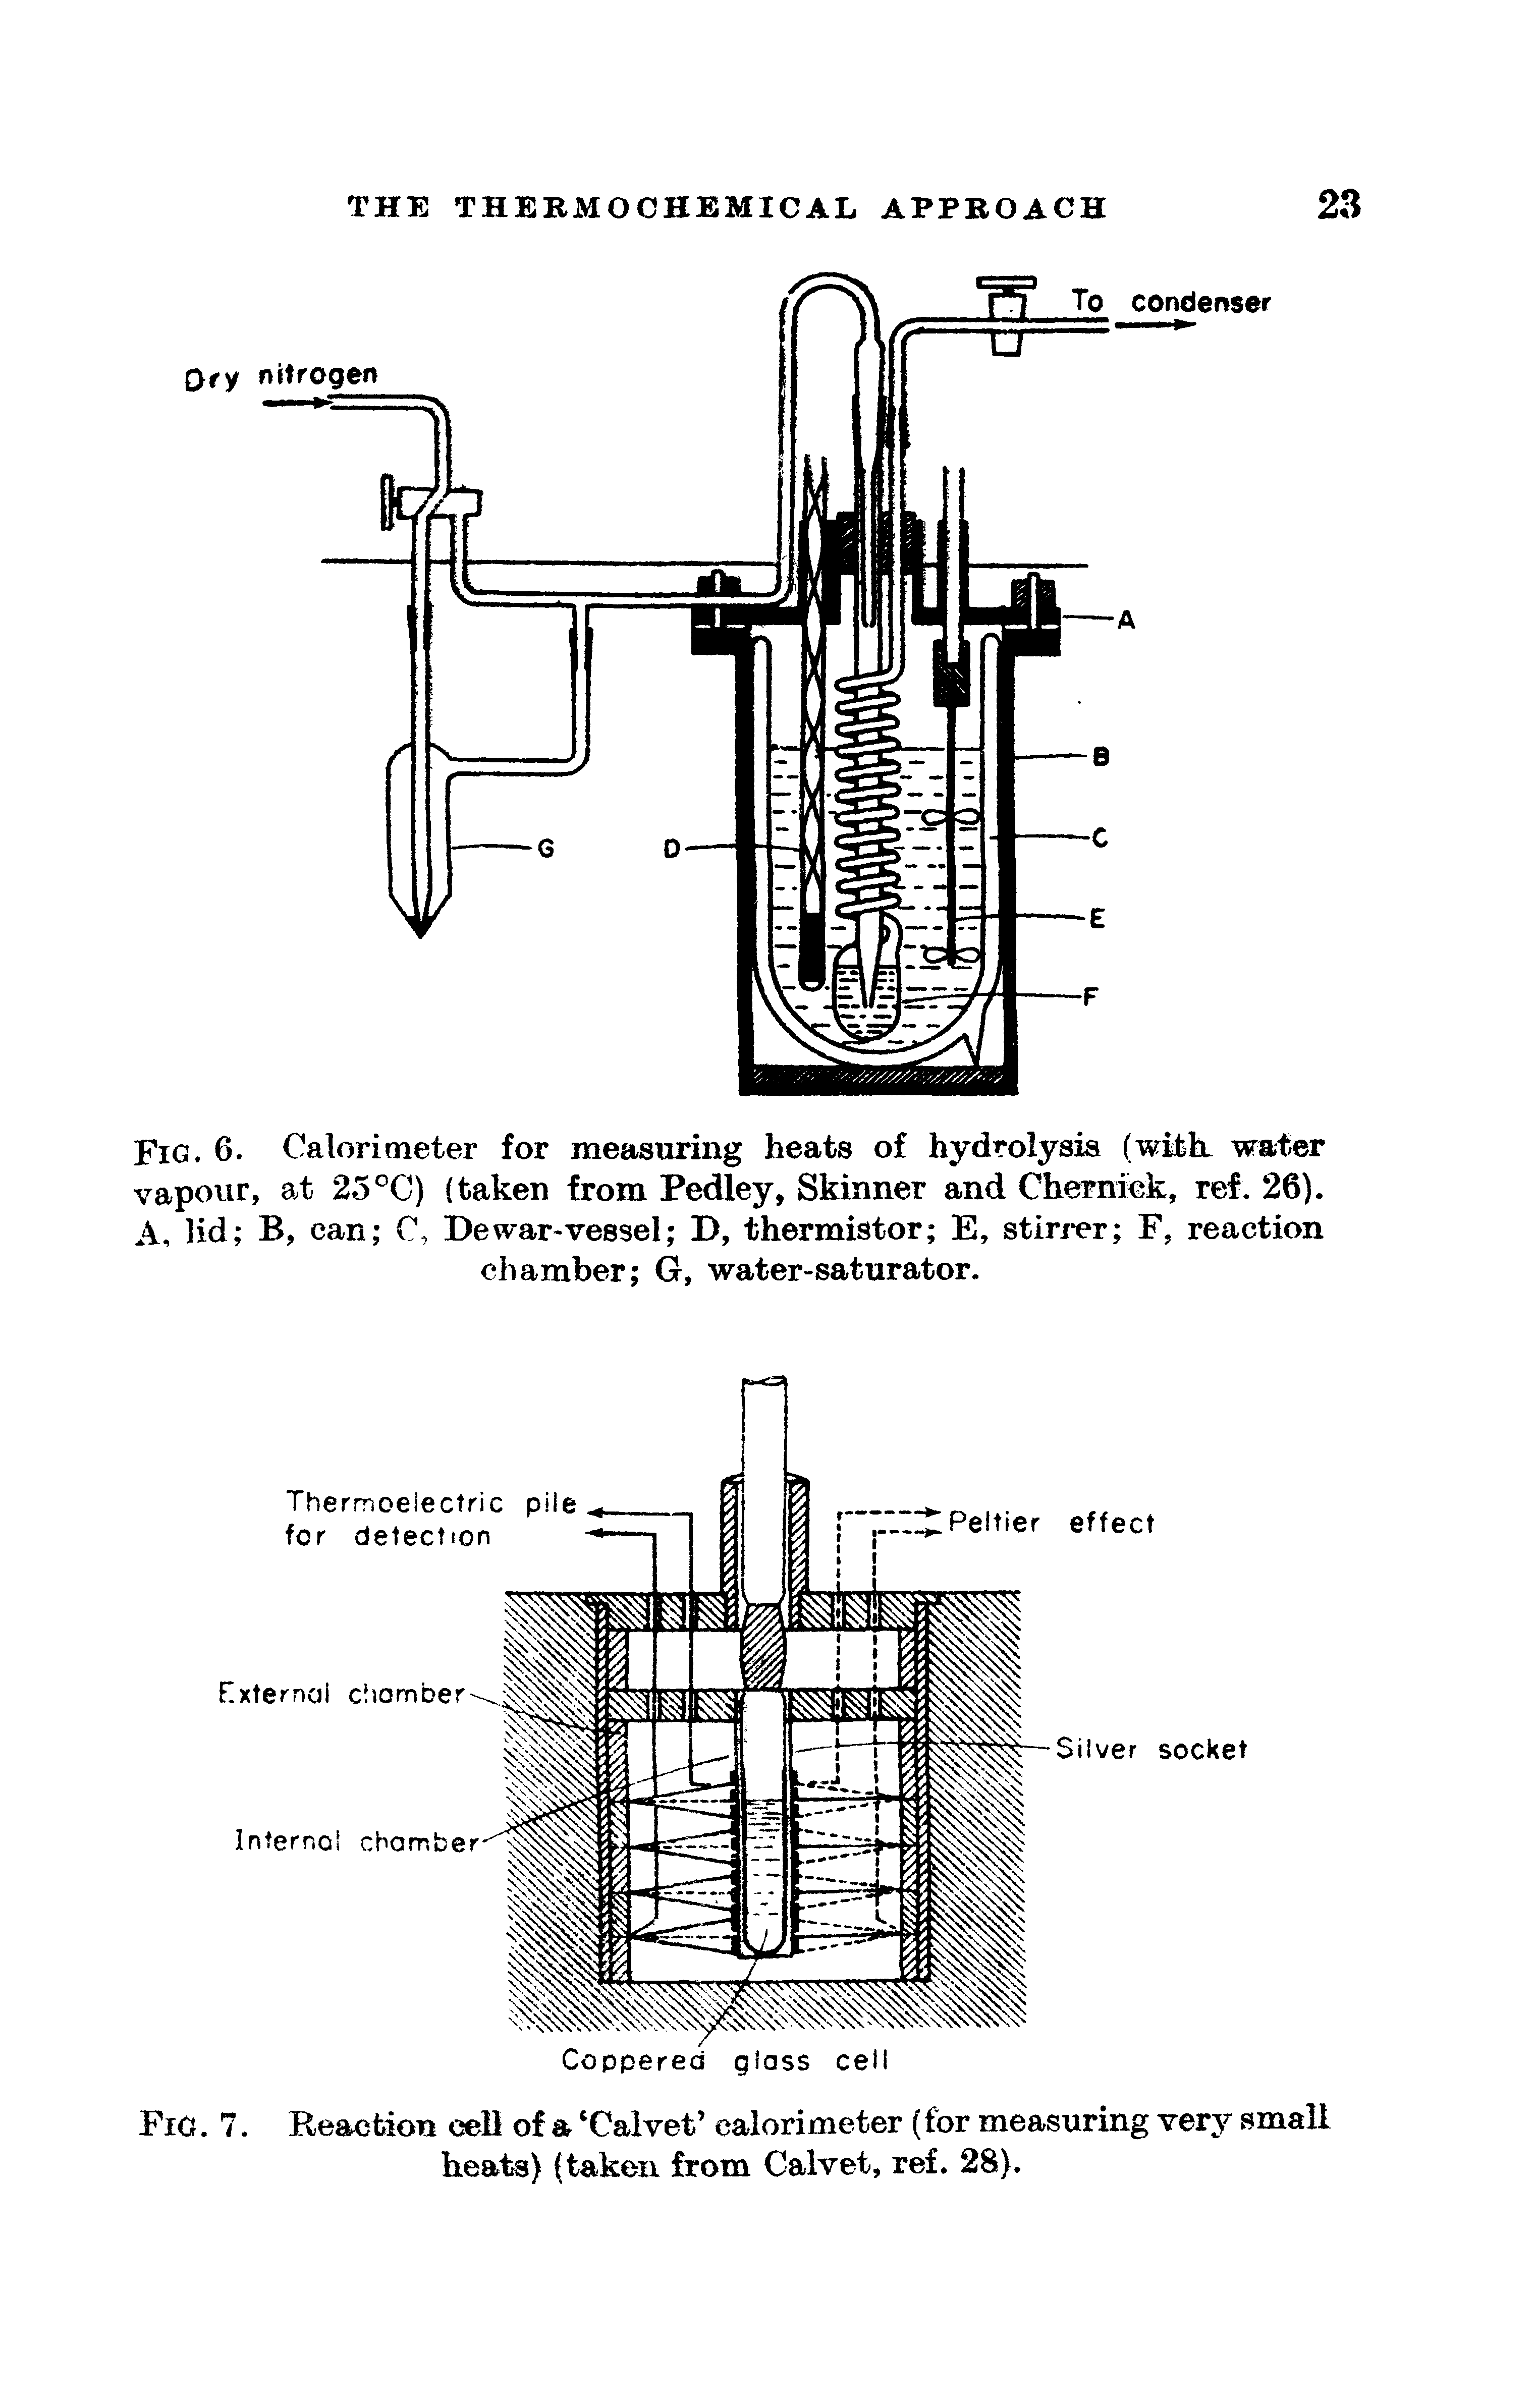 Fig. 6. Calorimeter for measuring heats of hydrolysis (wifck water vapour, at 25°C) (taken from Pedley, Skinner and Cherniek, ref. 26). A, lid B, can C, Dewar-vessel D, thermistor E, stirrer F, reaction chamber G, water-saturator.